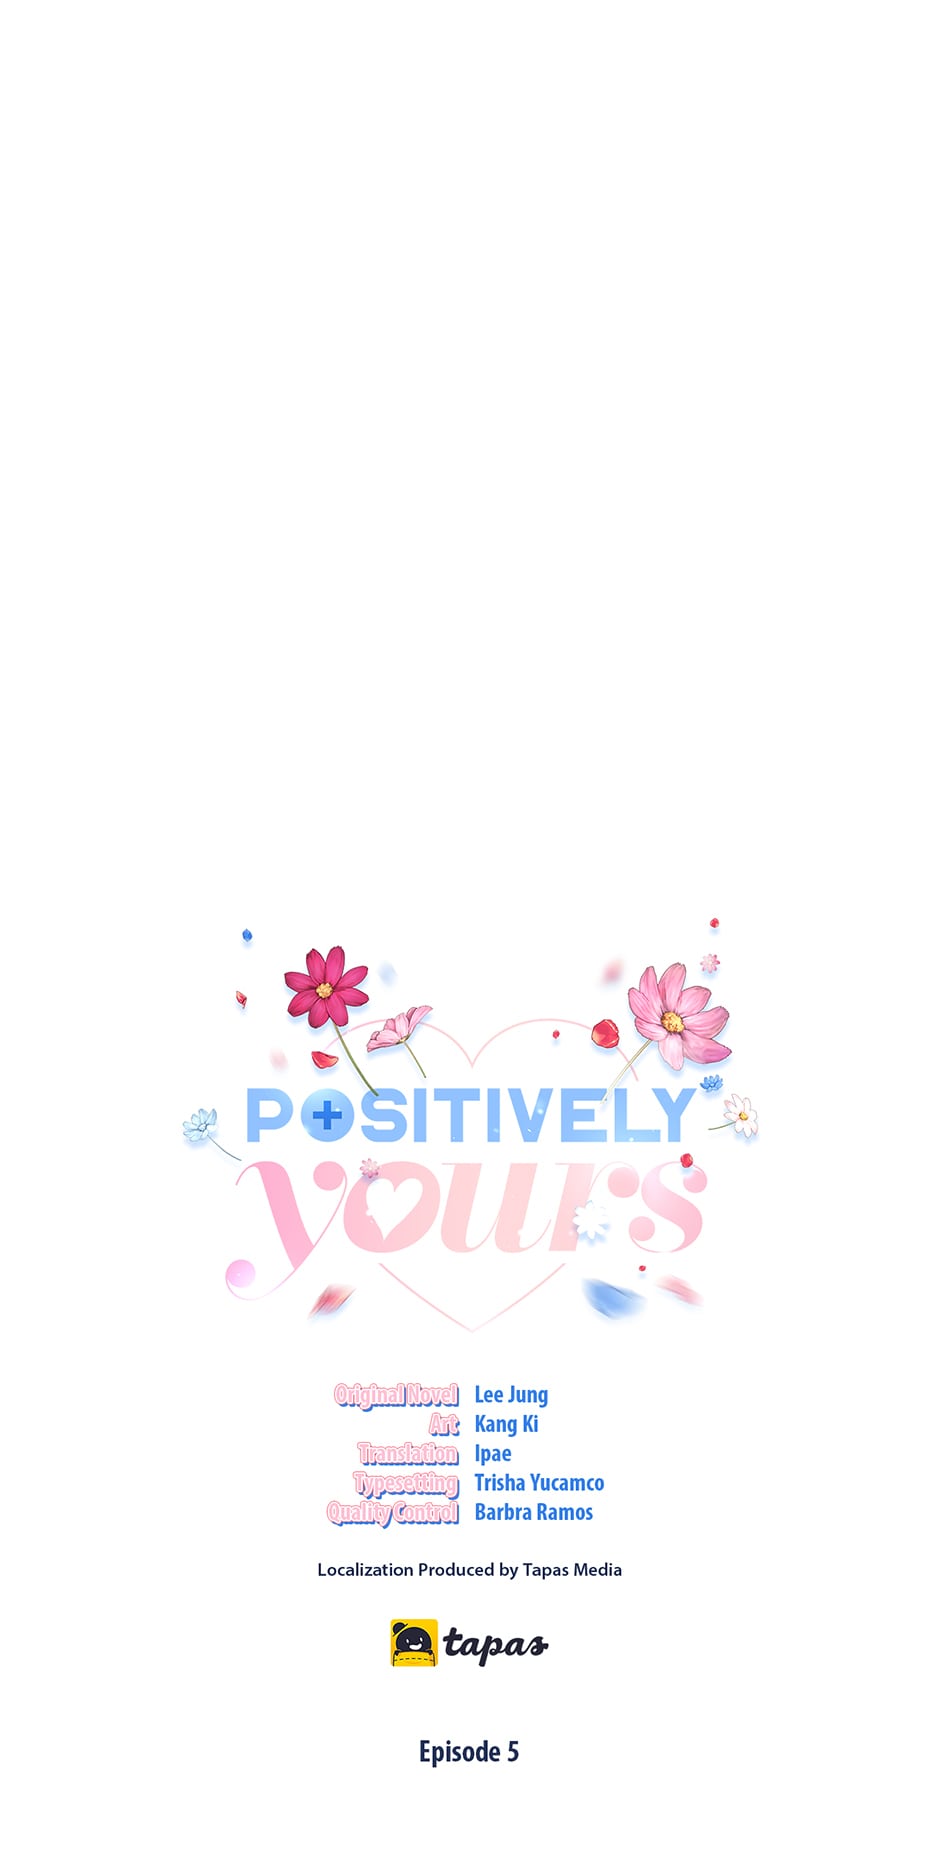 Positively Yours image